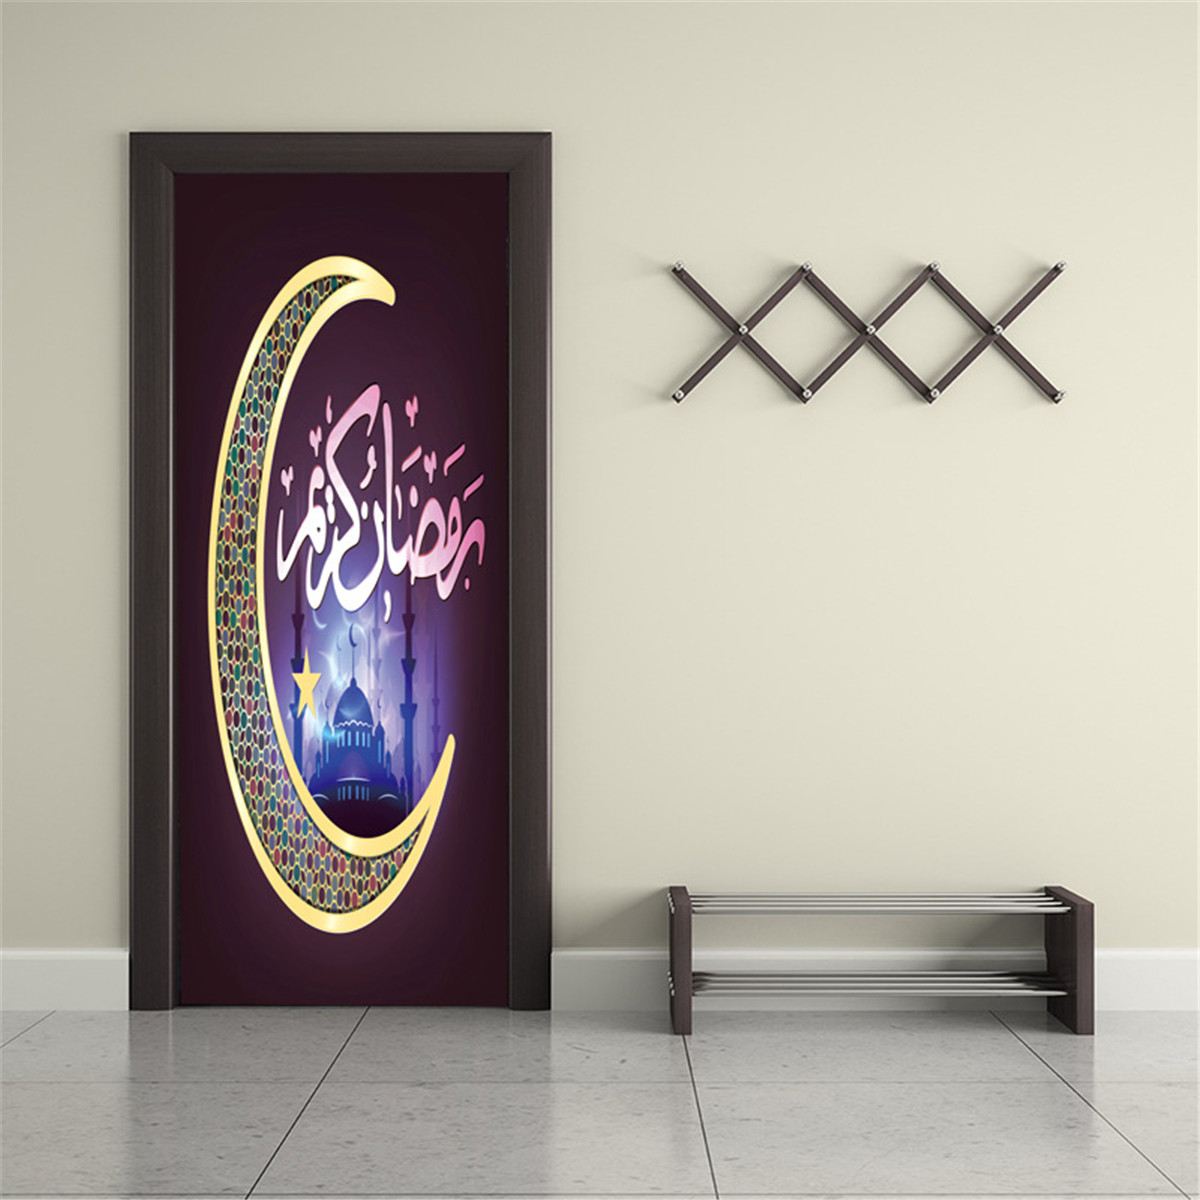 3D-Islamic-Wall-Sticker-Door-Wall-Paper-Removable-Wall-Decal-Office-Home-Living-Room-Bedroom-Decorat-1755284-3